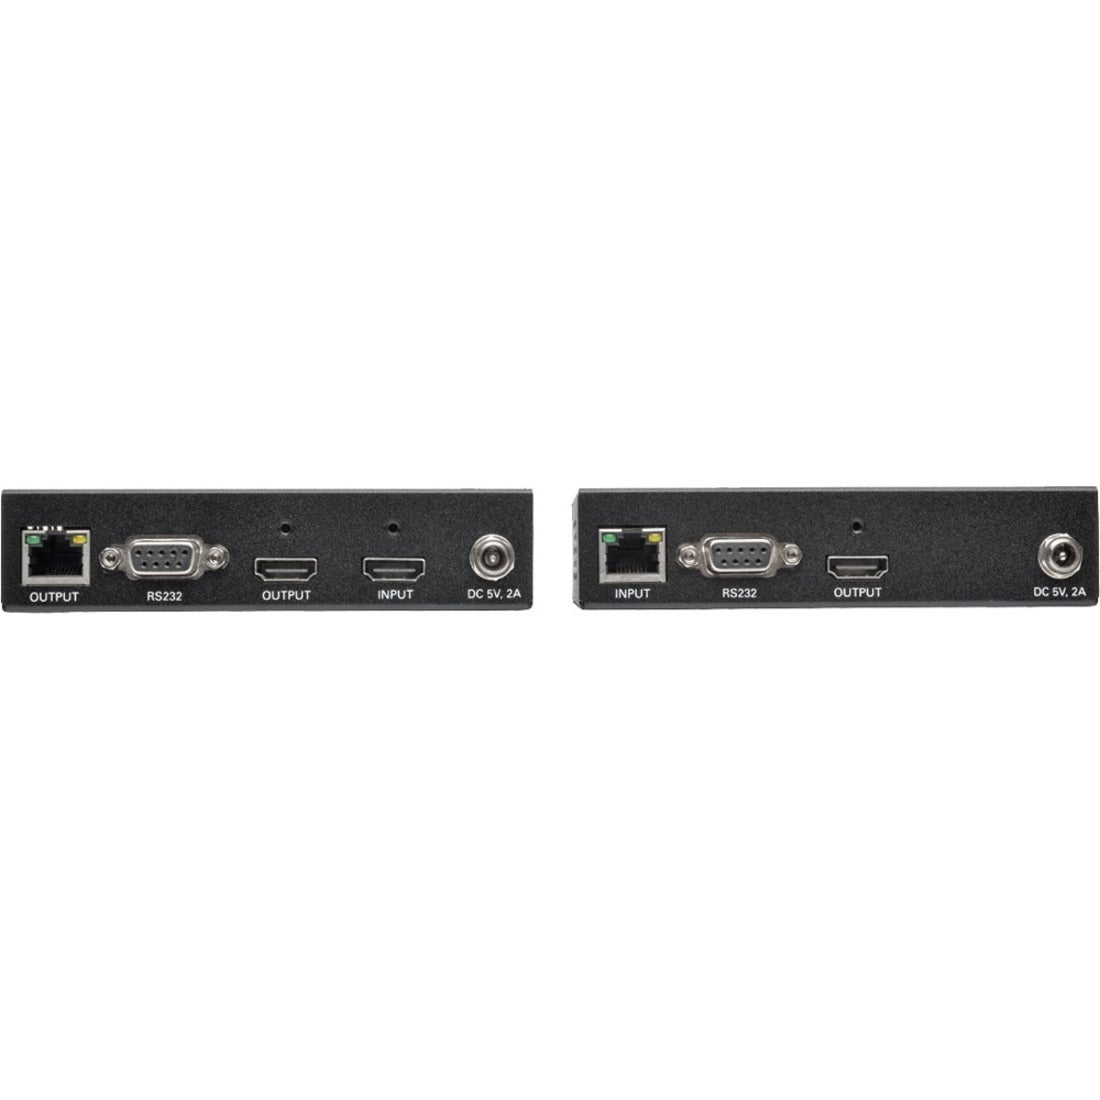 Tripp Lite B160-101-HDSI Video Extender Transmitter/Receiver, Full HD, 1920 x 1080, 1 Year Warranty, TAA Compliant, HDMI/DVI Audio/Video with RS-232 Serial